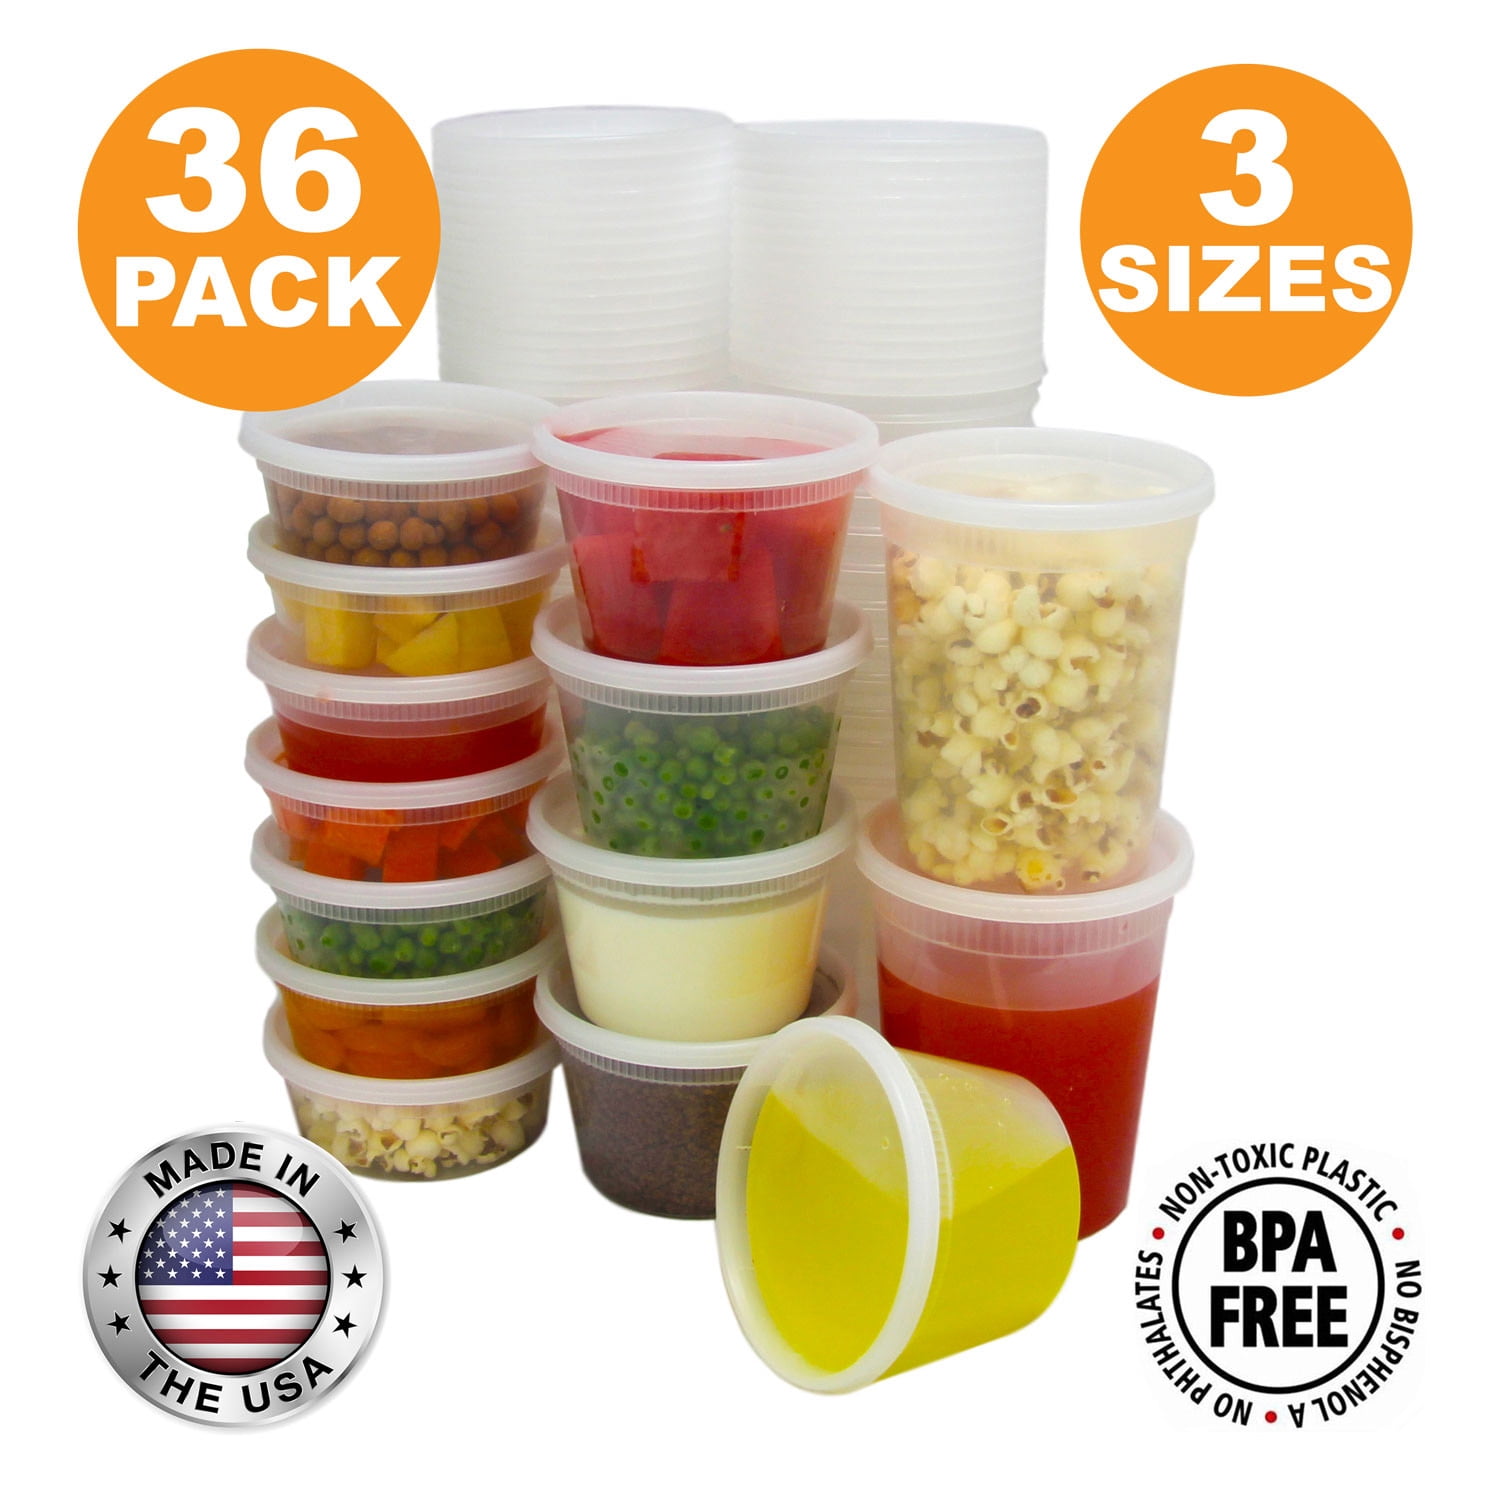 ChoiceHD 16 oz. Microwavable Translucent Plastic Deli Container